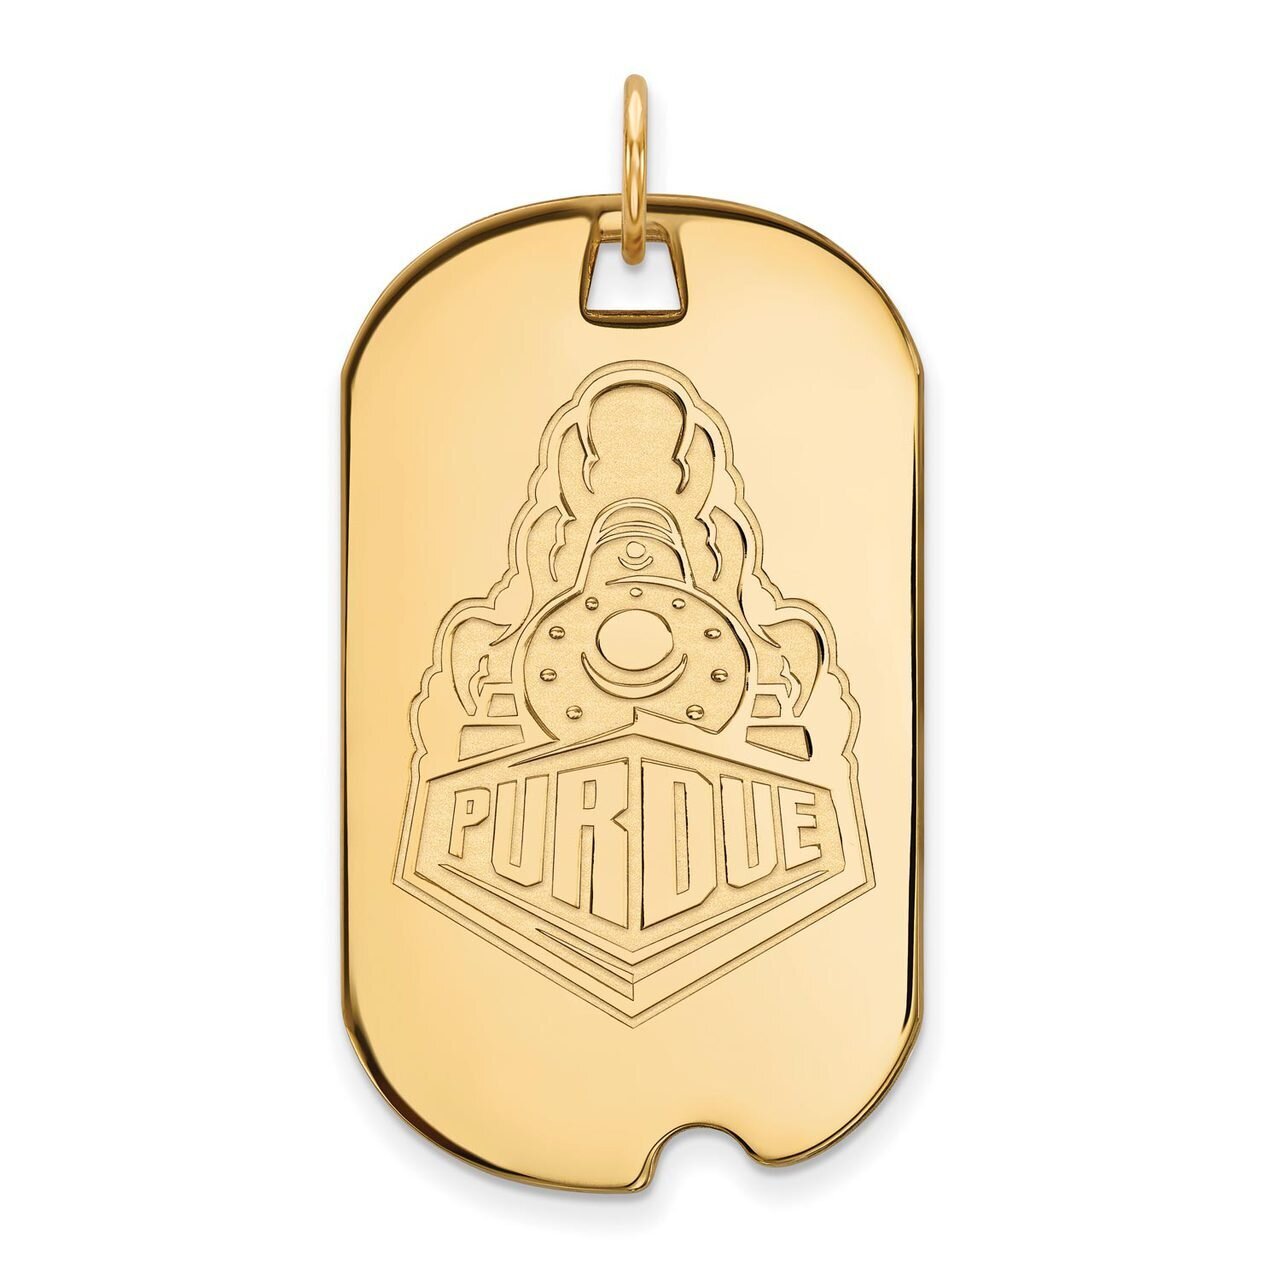 Purdue Large Dog Tag 10k Yellow Gold 1Y057PU